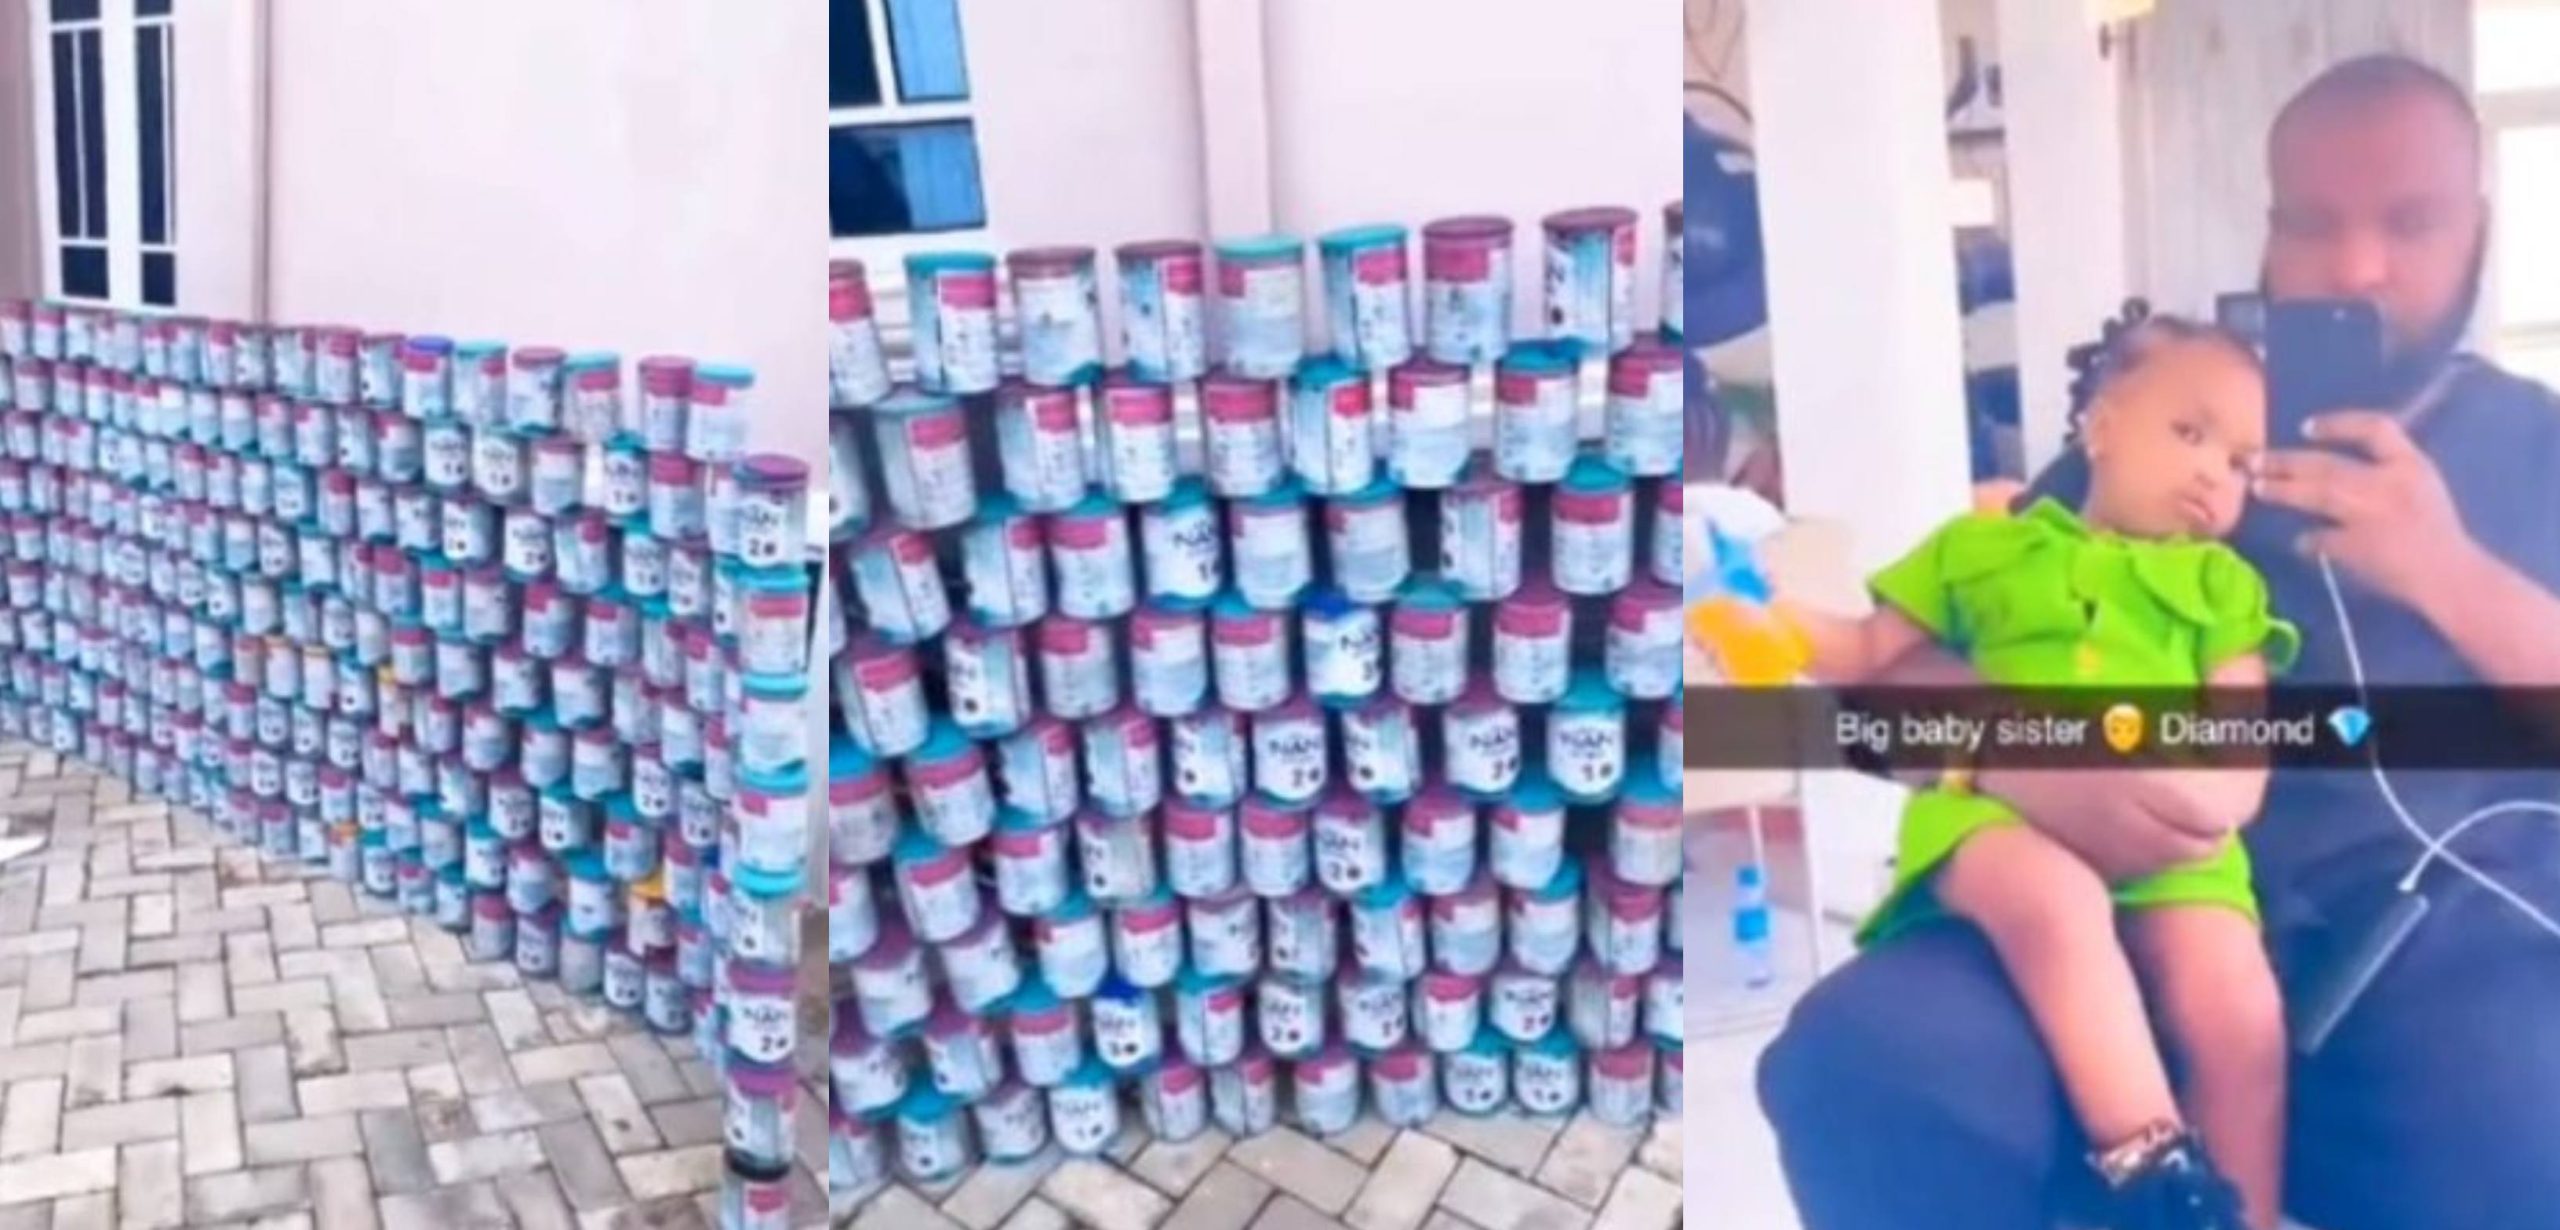 Nigerian Man says as his little daughter drinks 212 cans of NAN milk